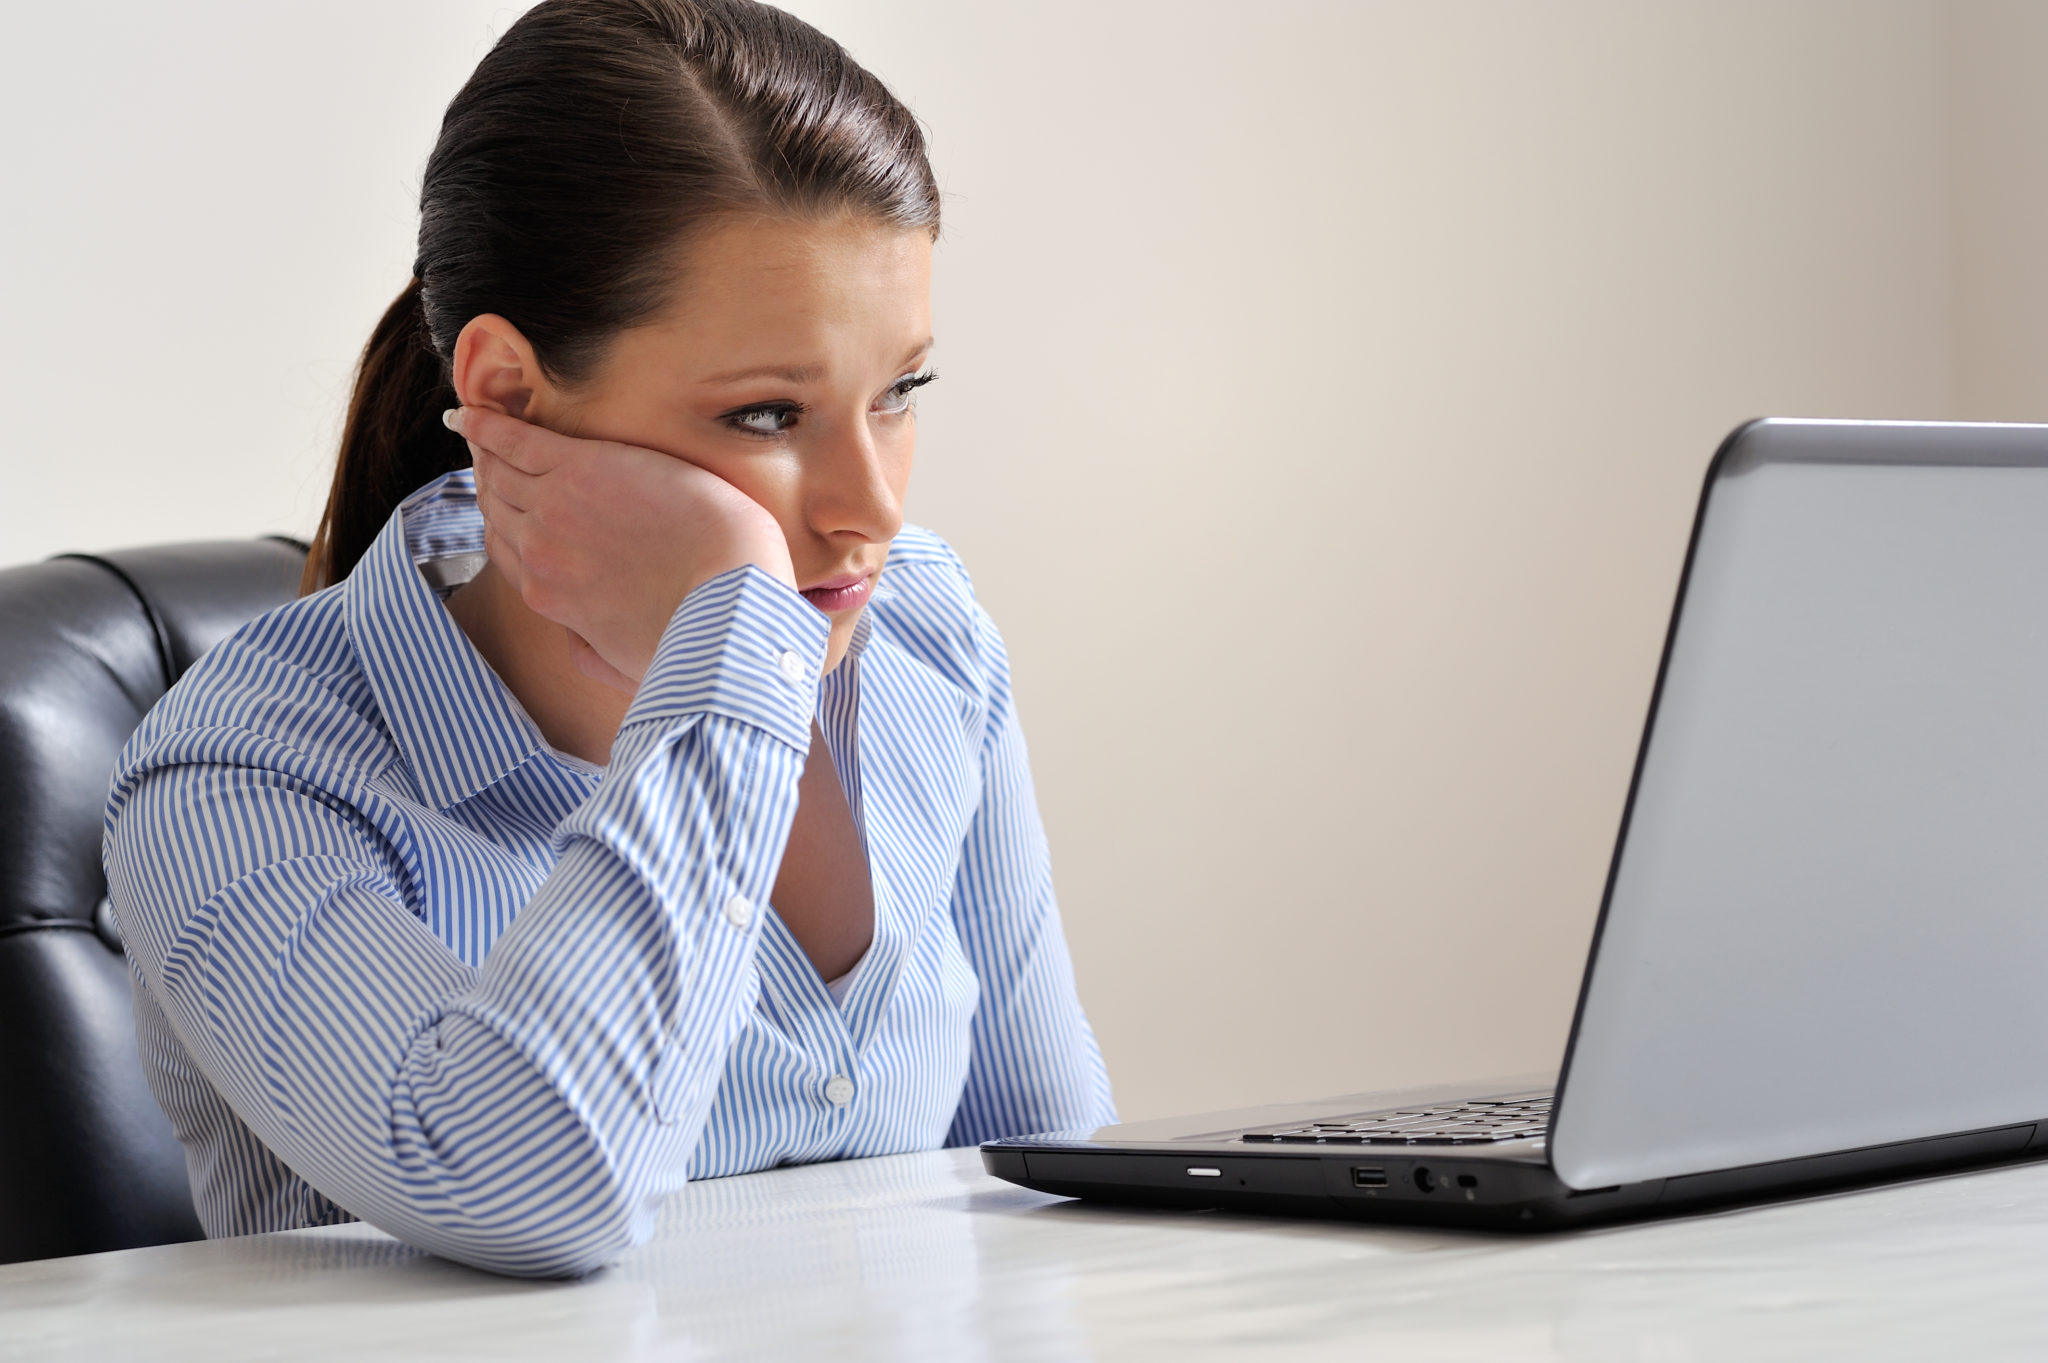 Woman on laptop looking disappointed